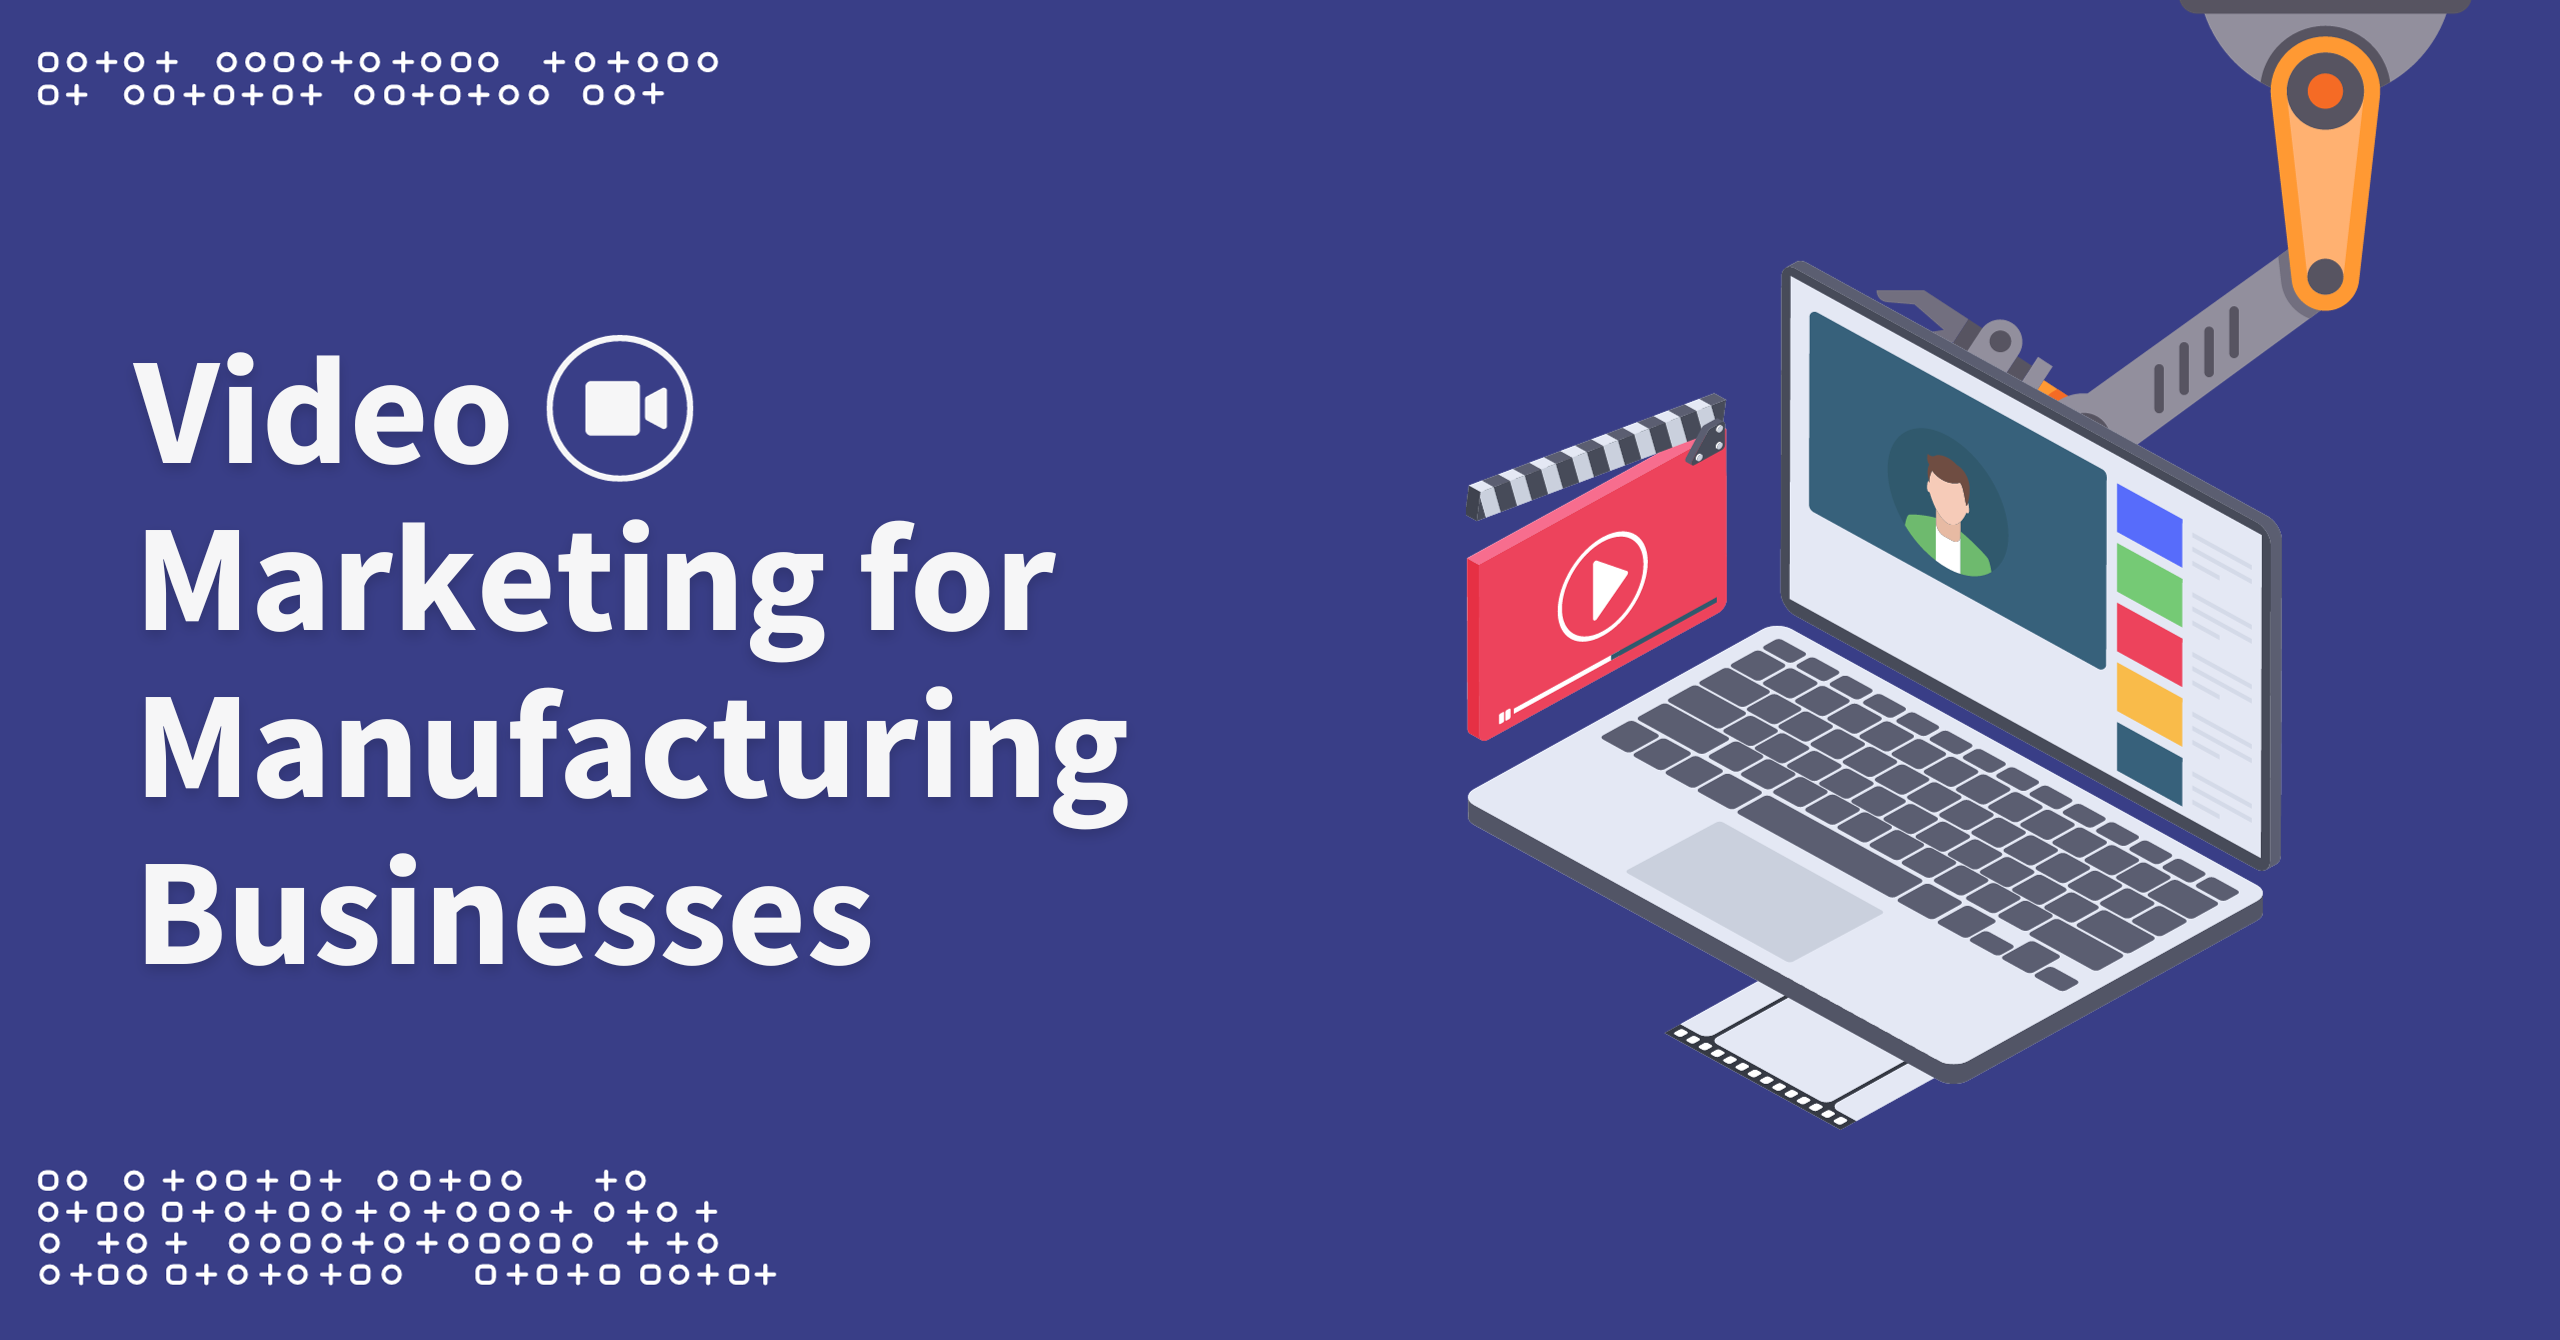 Video Marketing for Manufacturing Businesses Explained